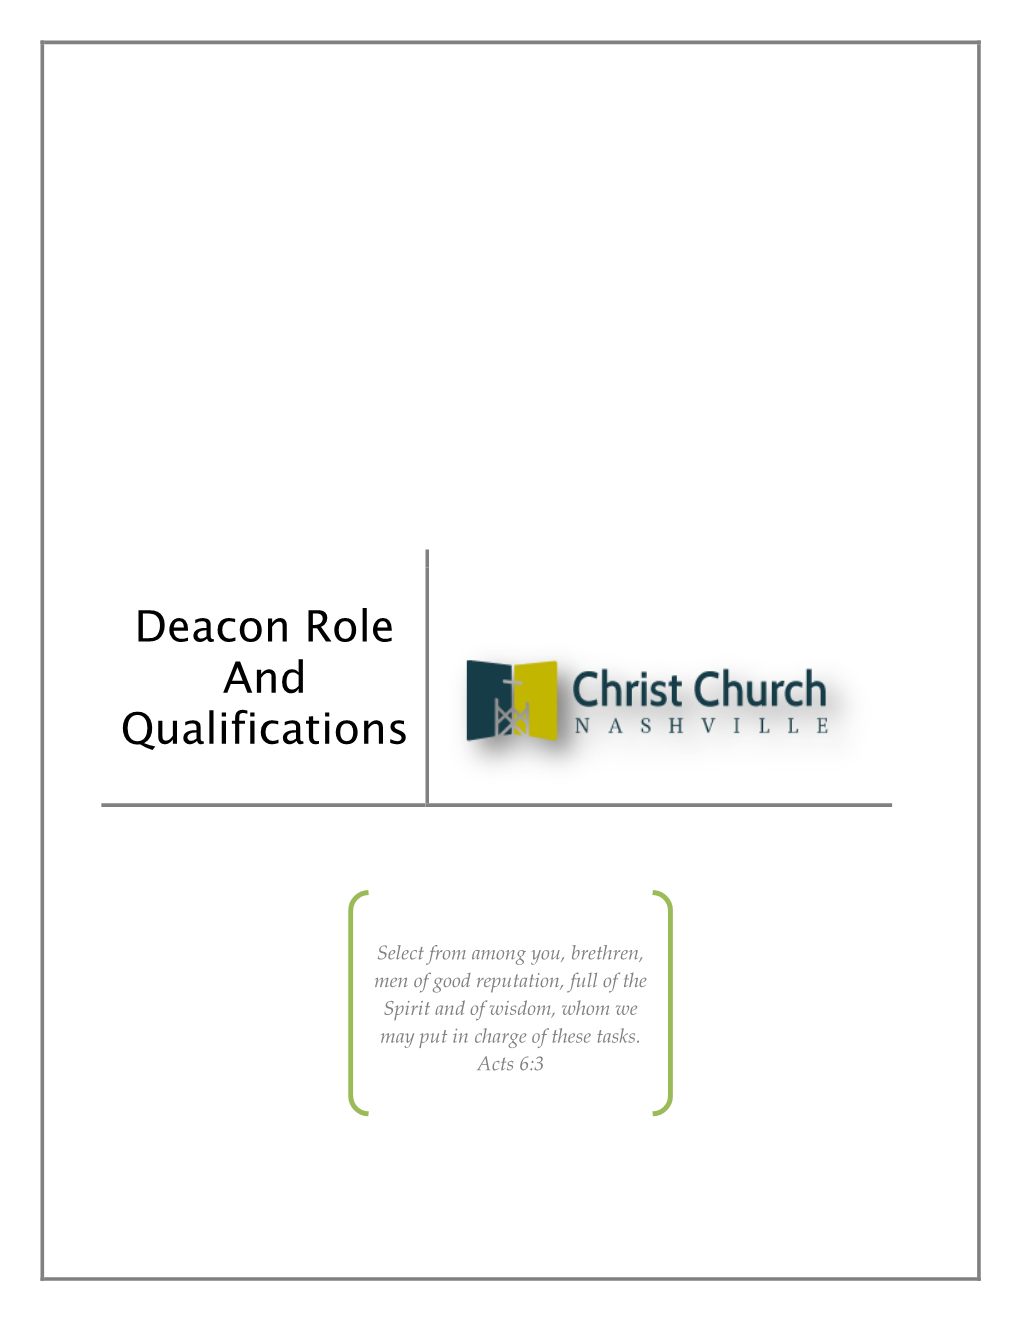 Deacon Role and Qualifications